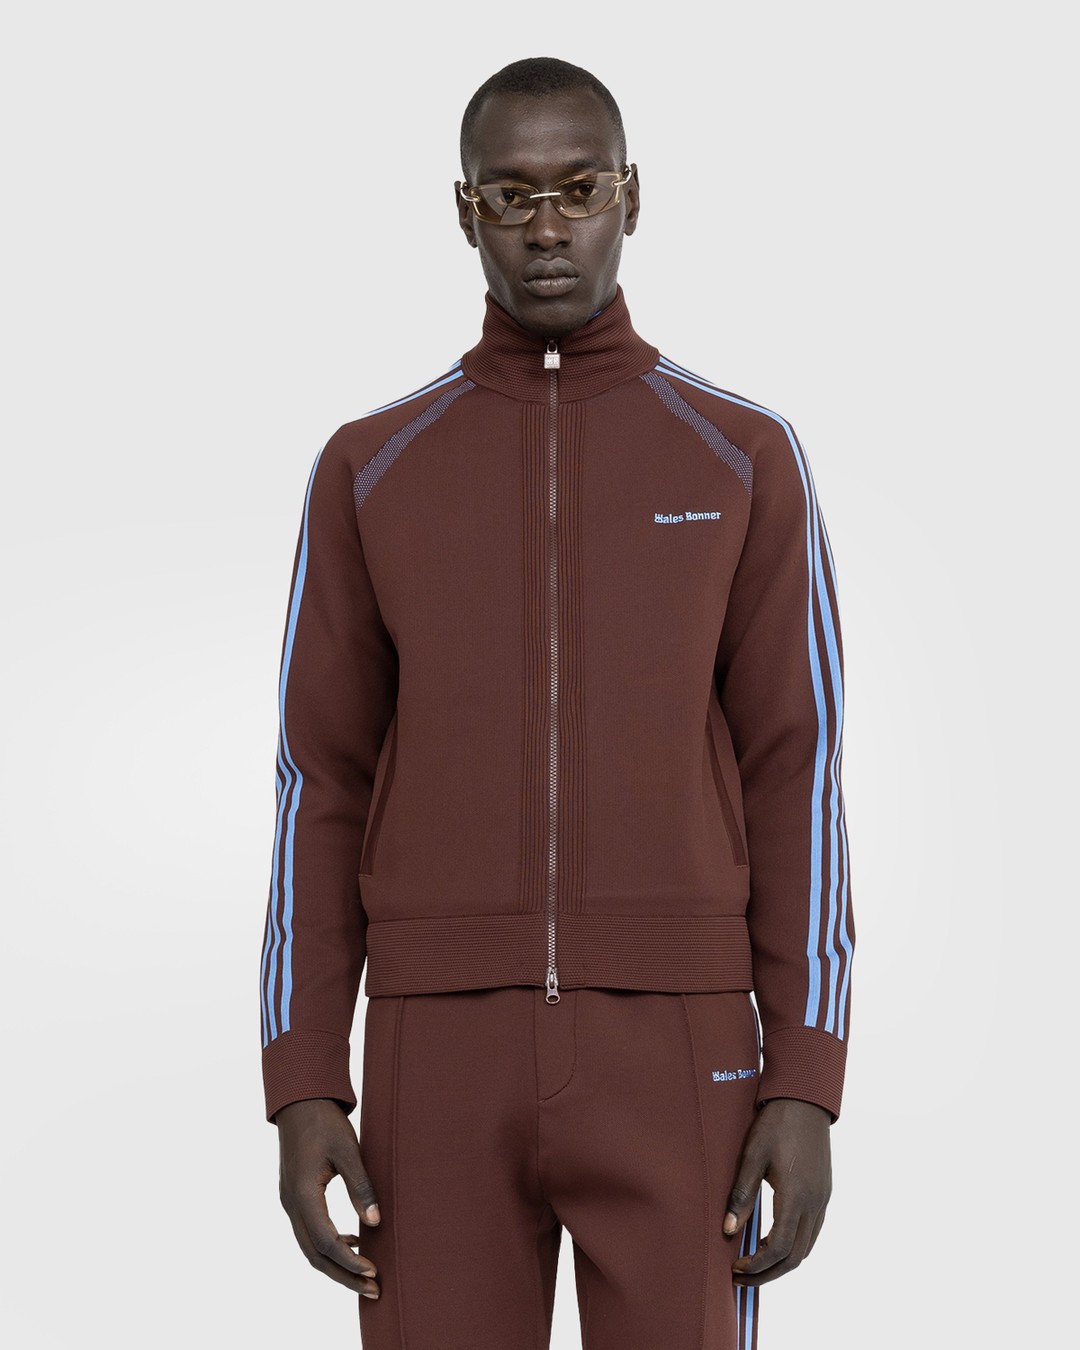 Adidas x Wales Bonner – Knit Track Top Mystery Brown - Tops - Brown - Image 2